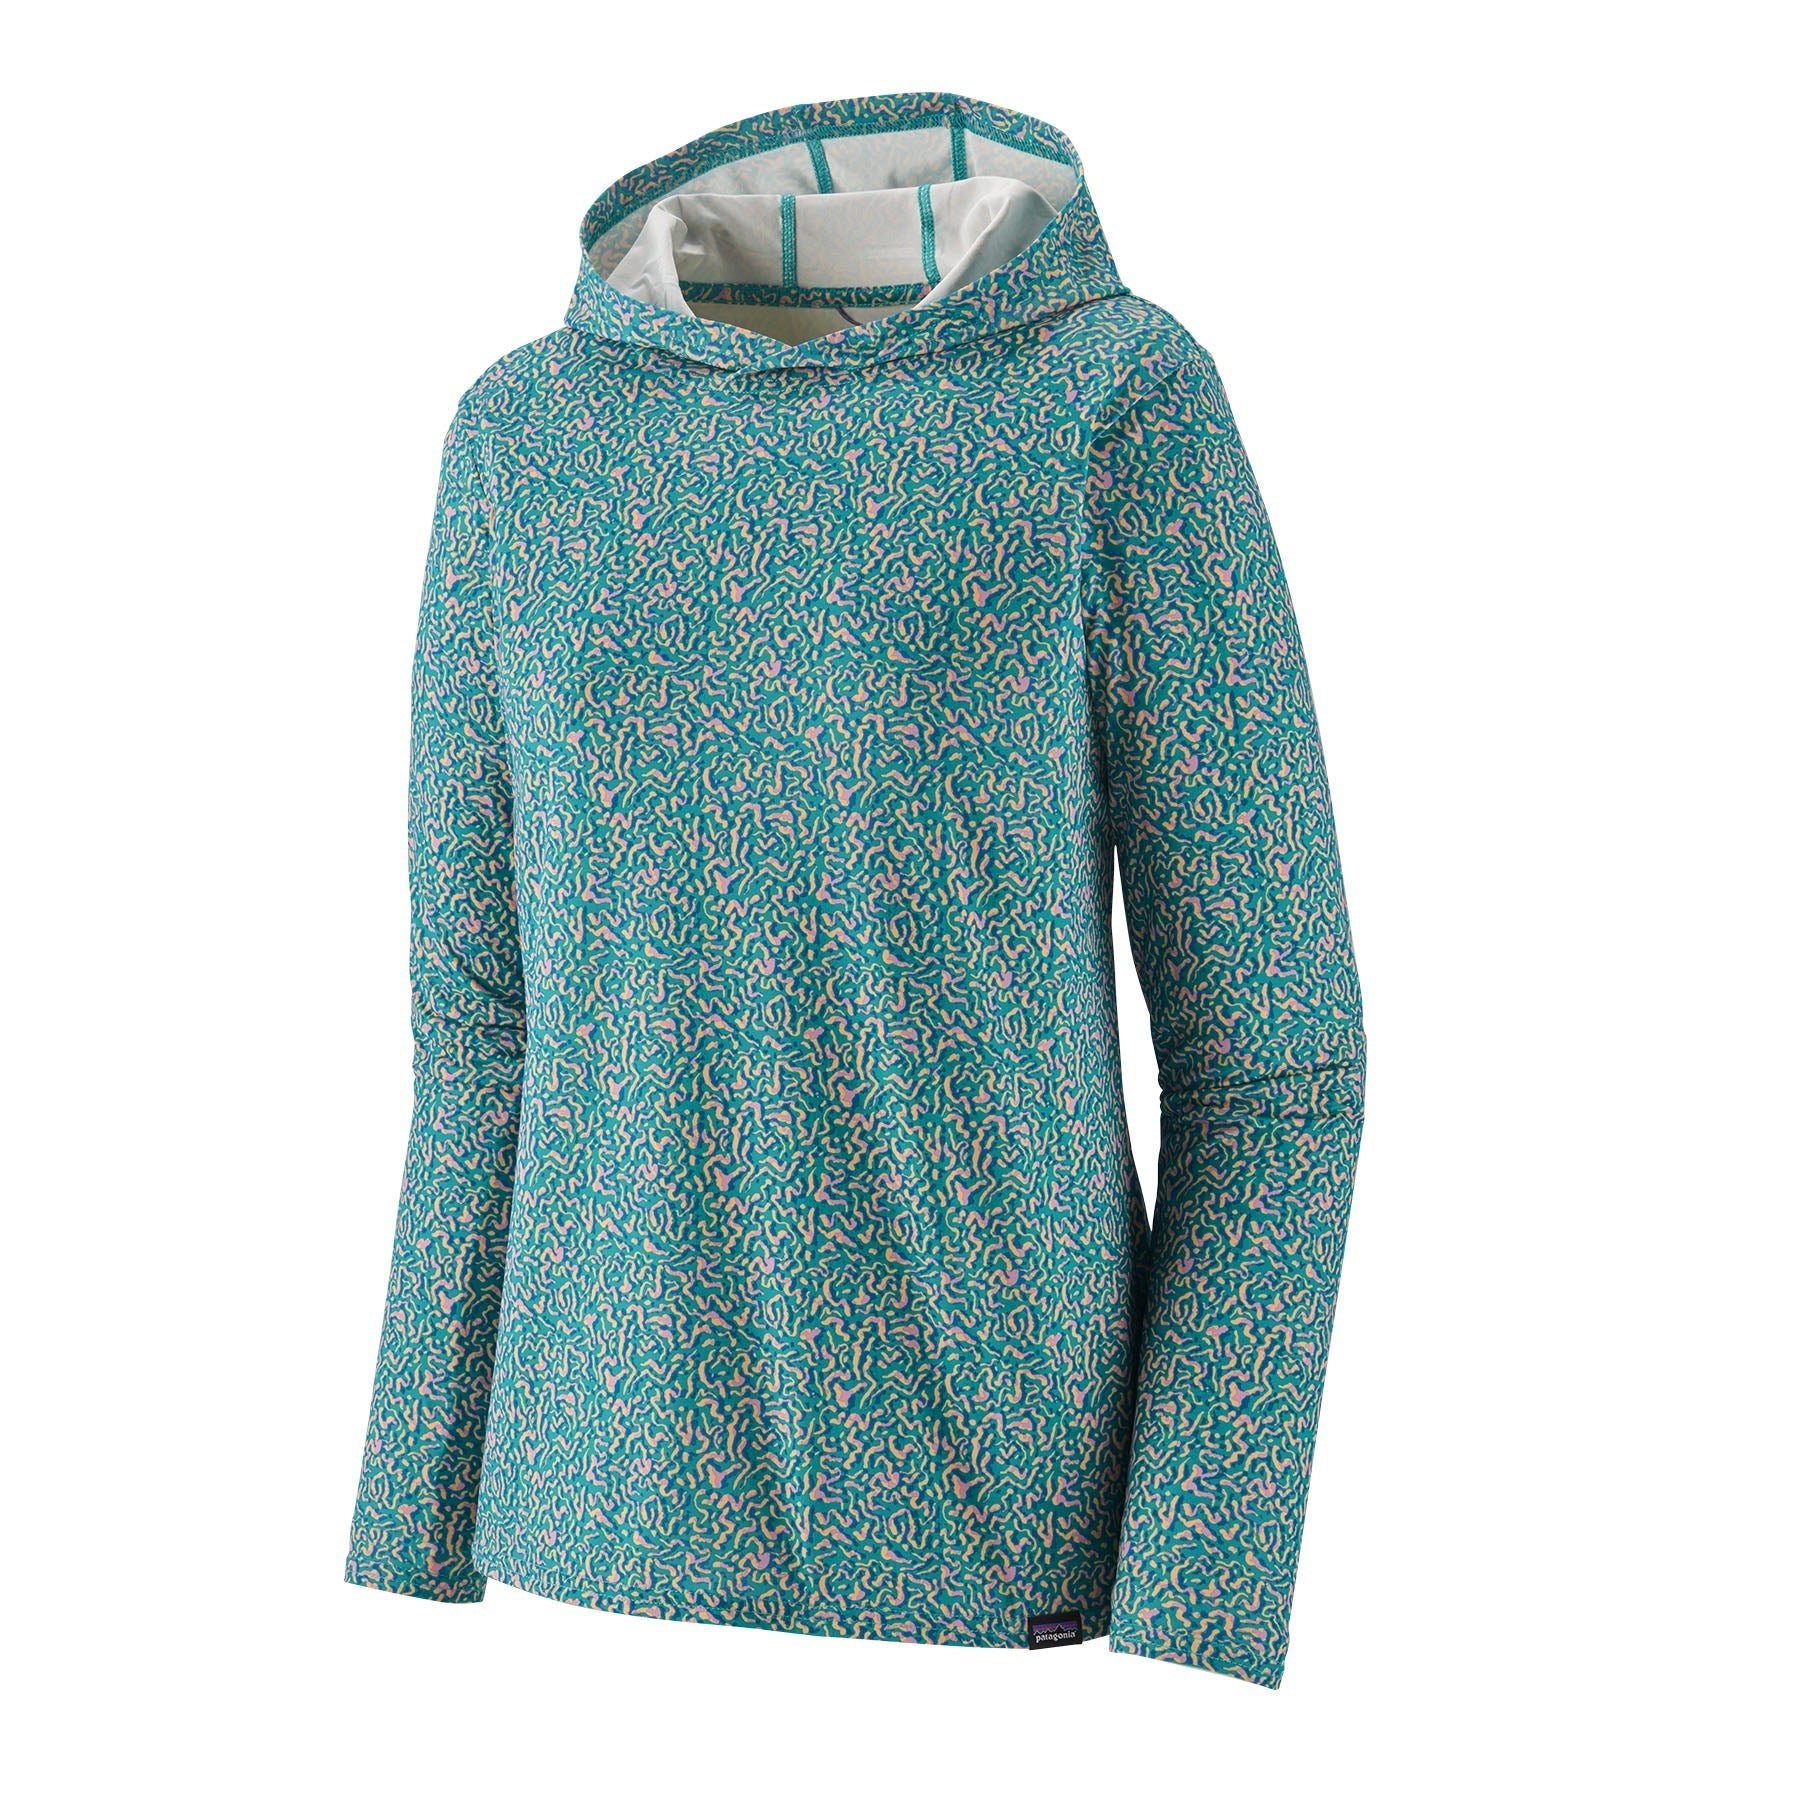 Women's Capilene® Cool Daily Hoody in Sea Texture: Subtidal Blue | Patagonia Bend